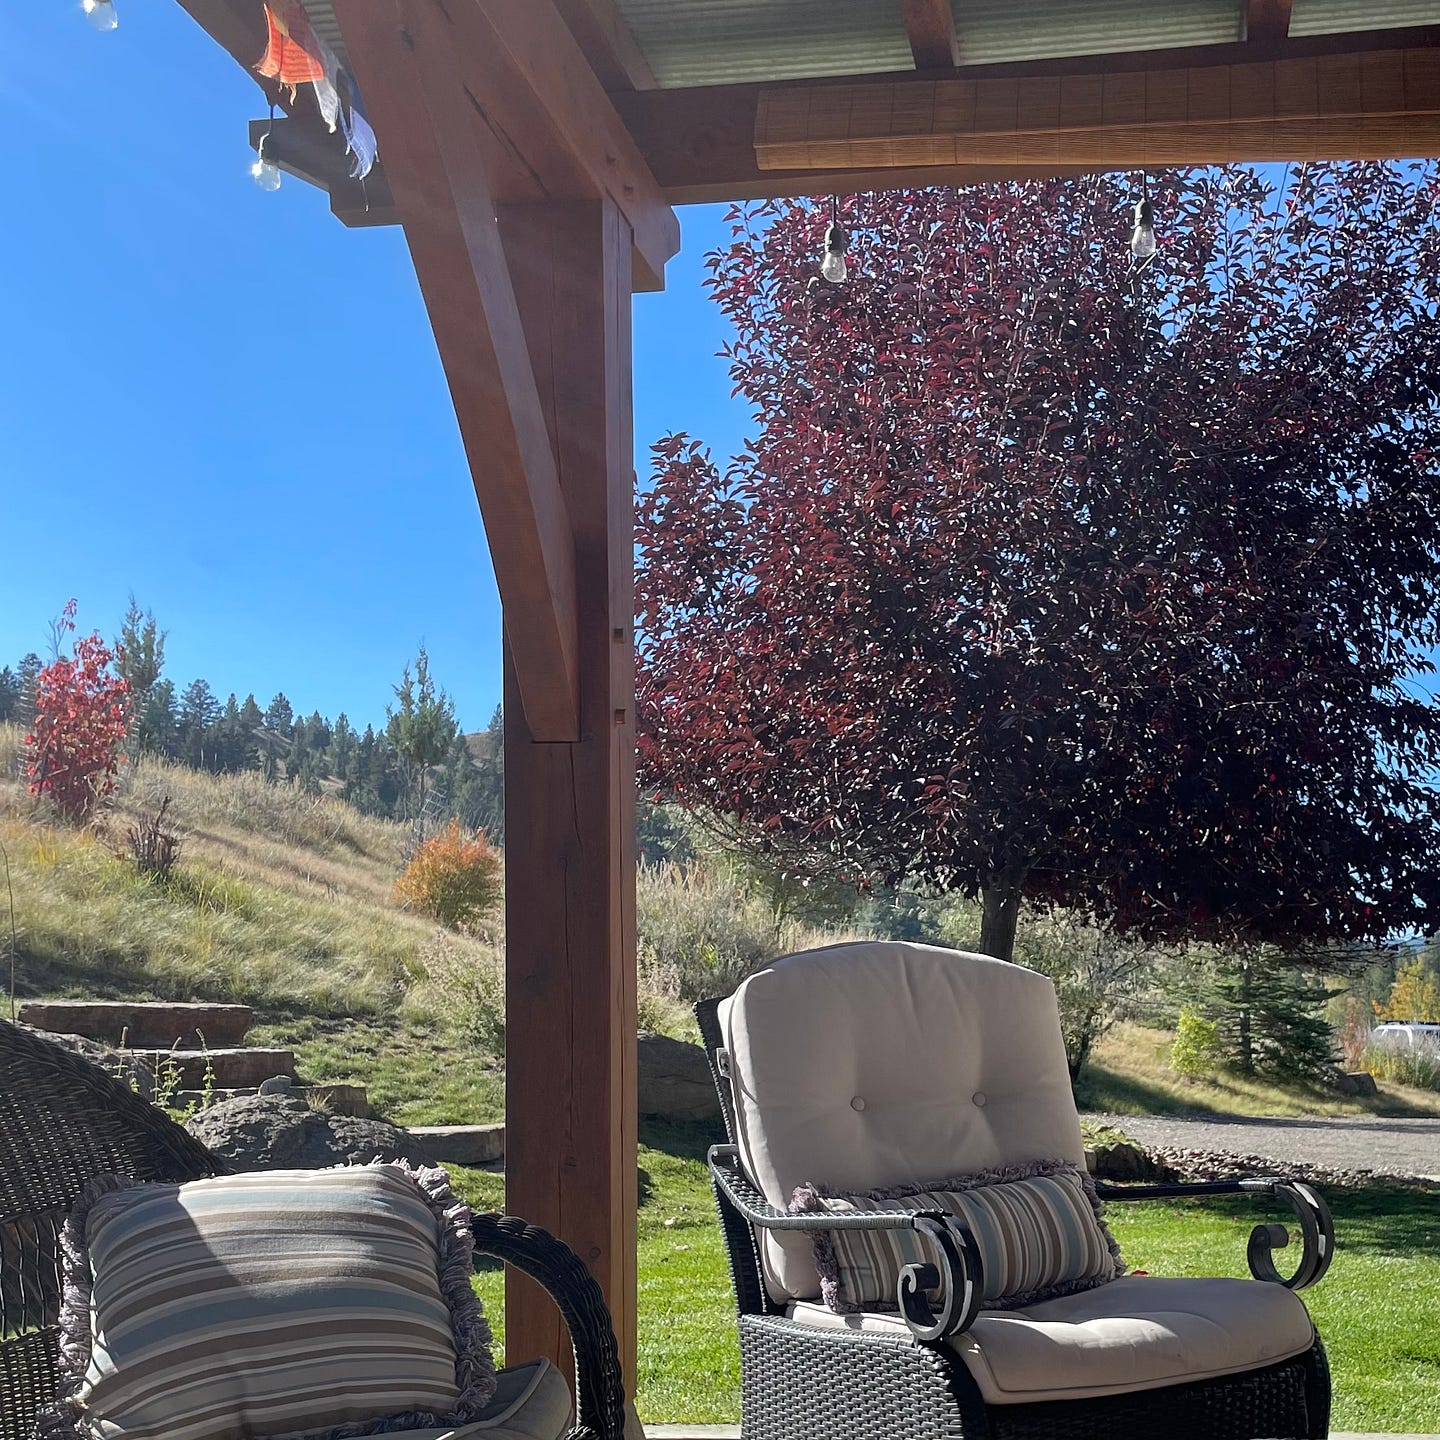 A view of blue sky and fall foilage from a patio under a pergula